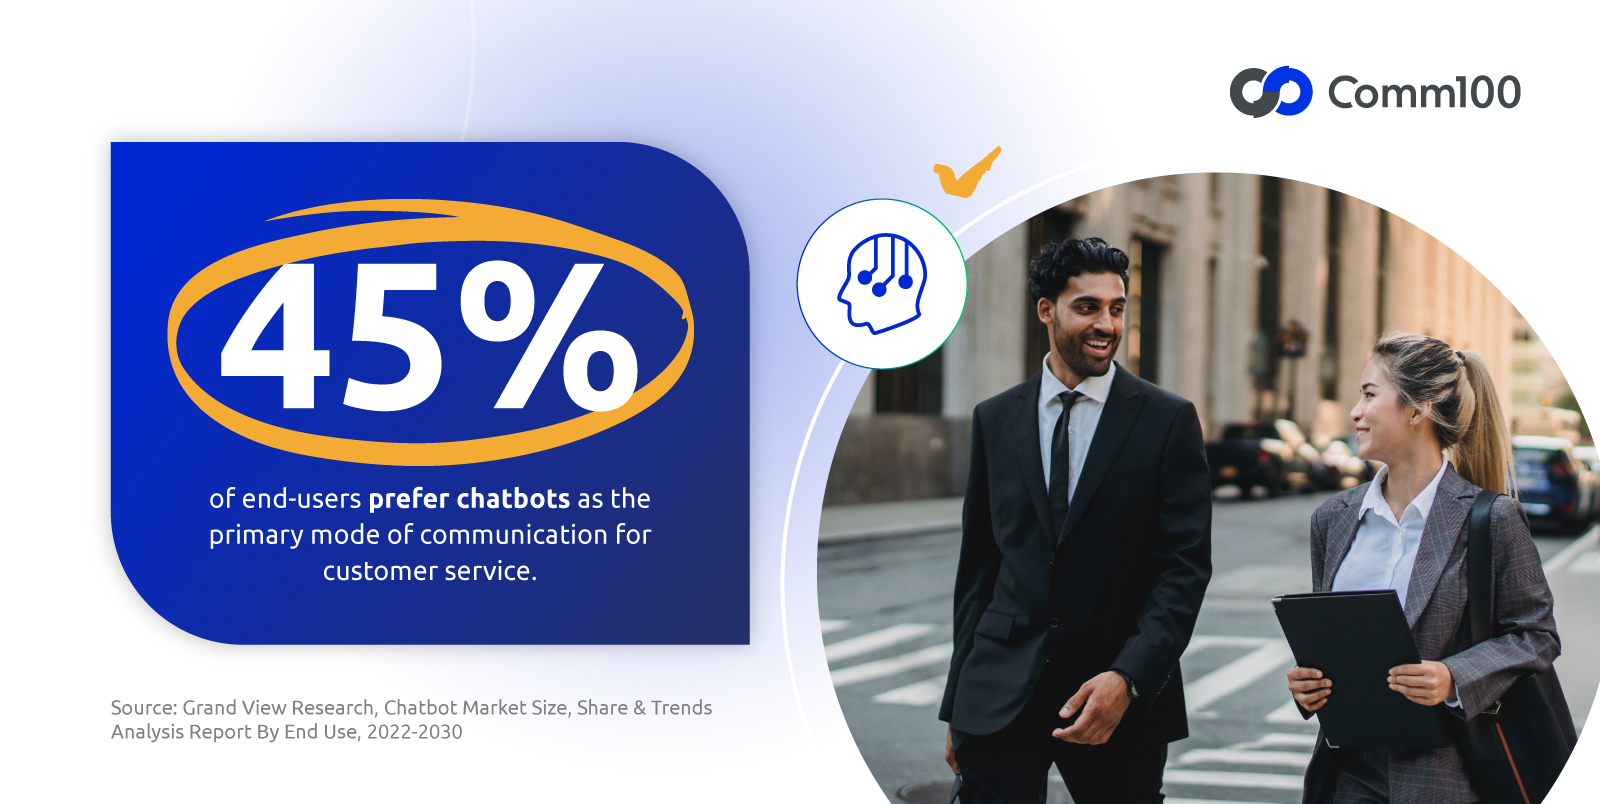 45% of end-users prefer charbots as the primary mode of communication for customer service